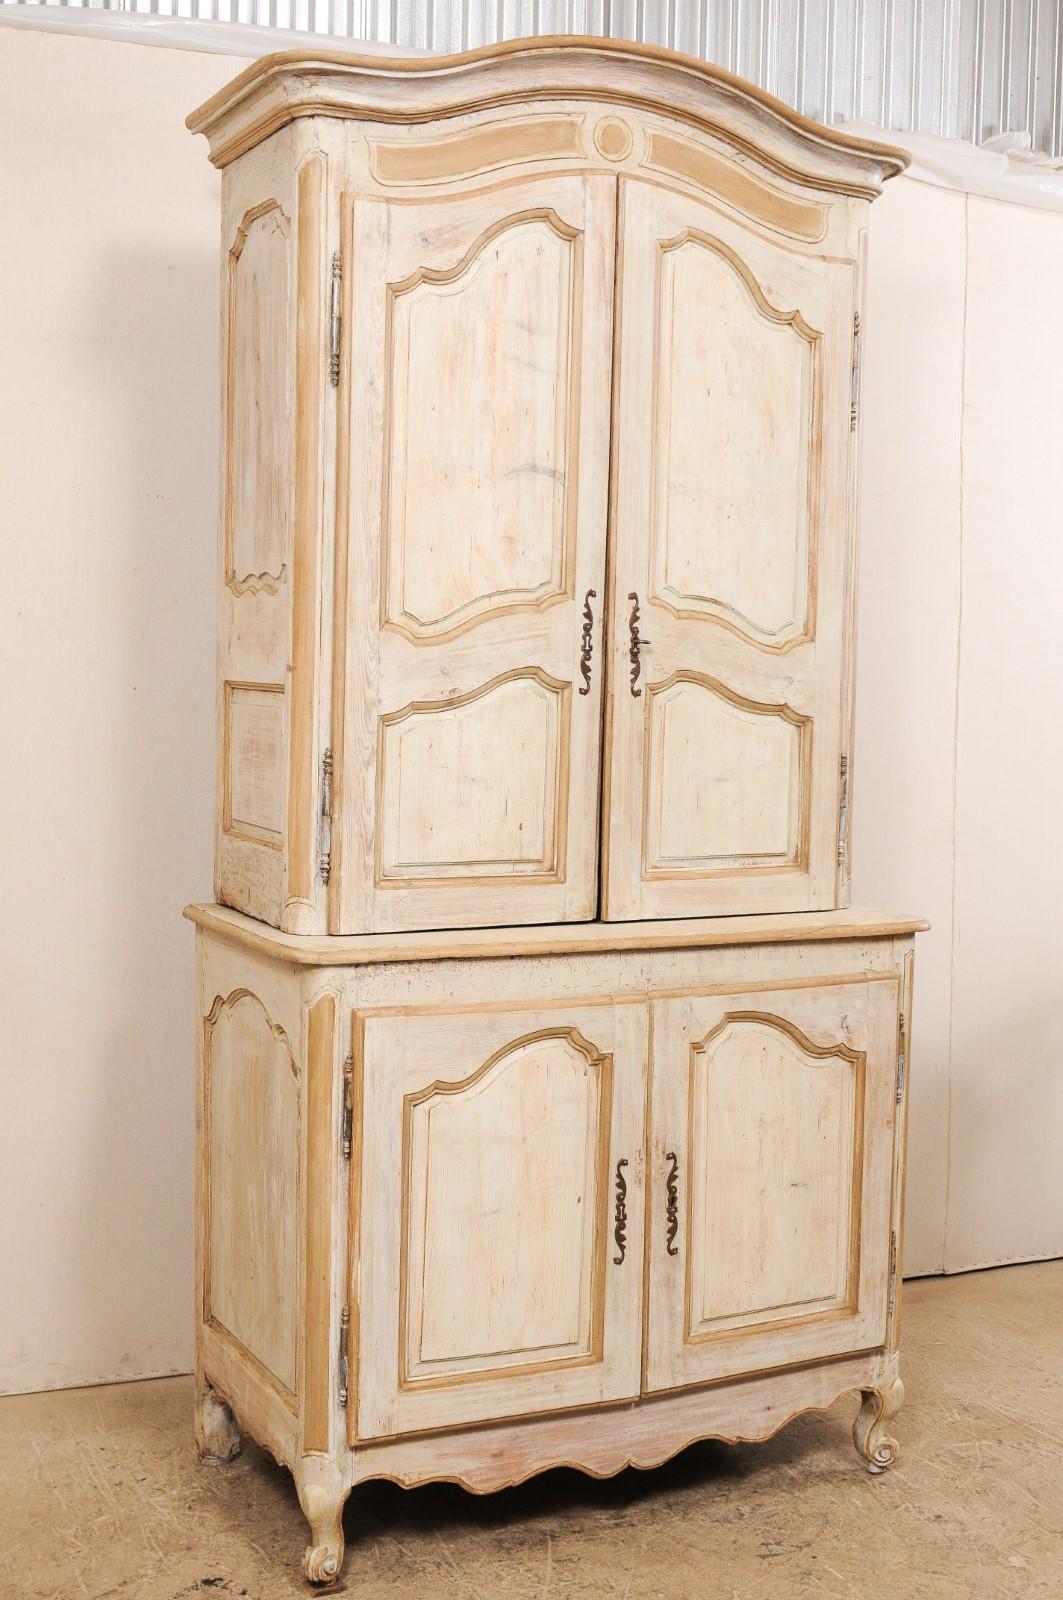 French Provincial Tall French Late 18th Century Painted Wood Buffet à Deux-Corps Cabinet